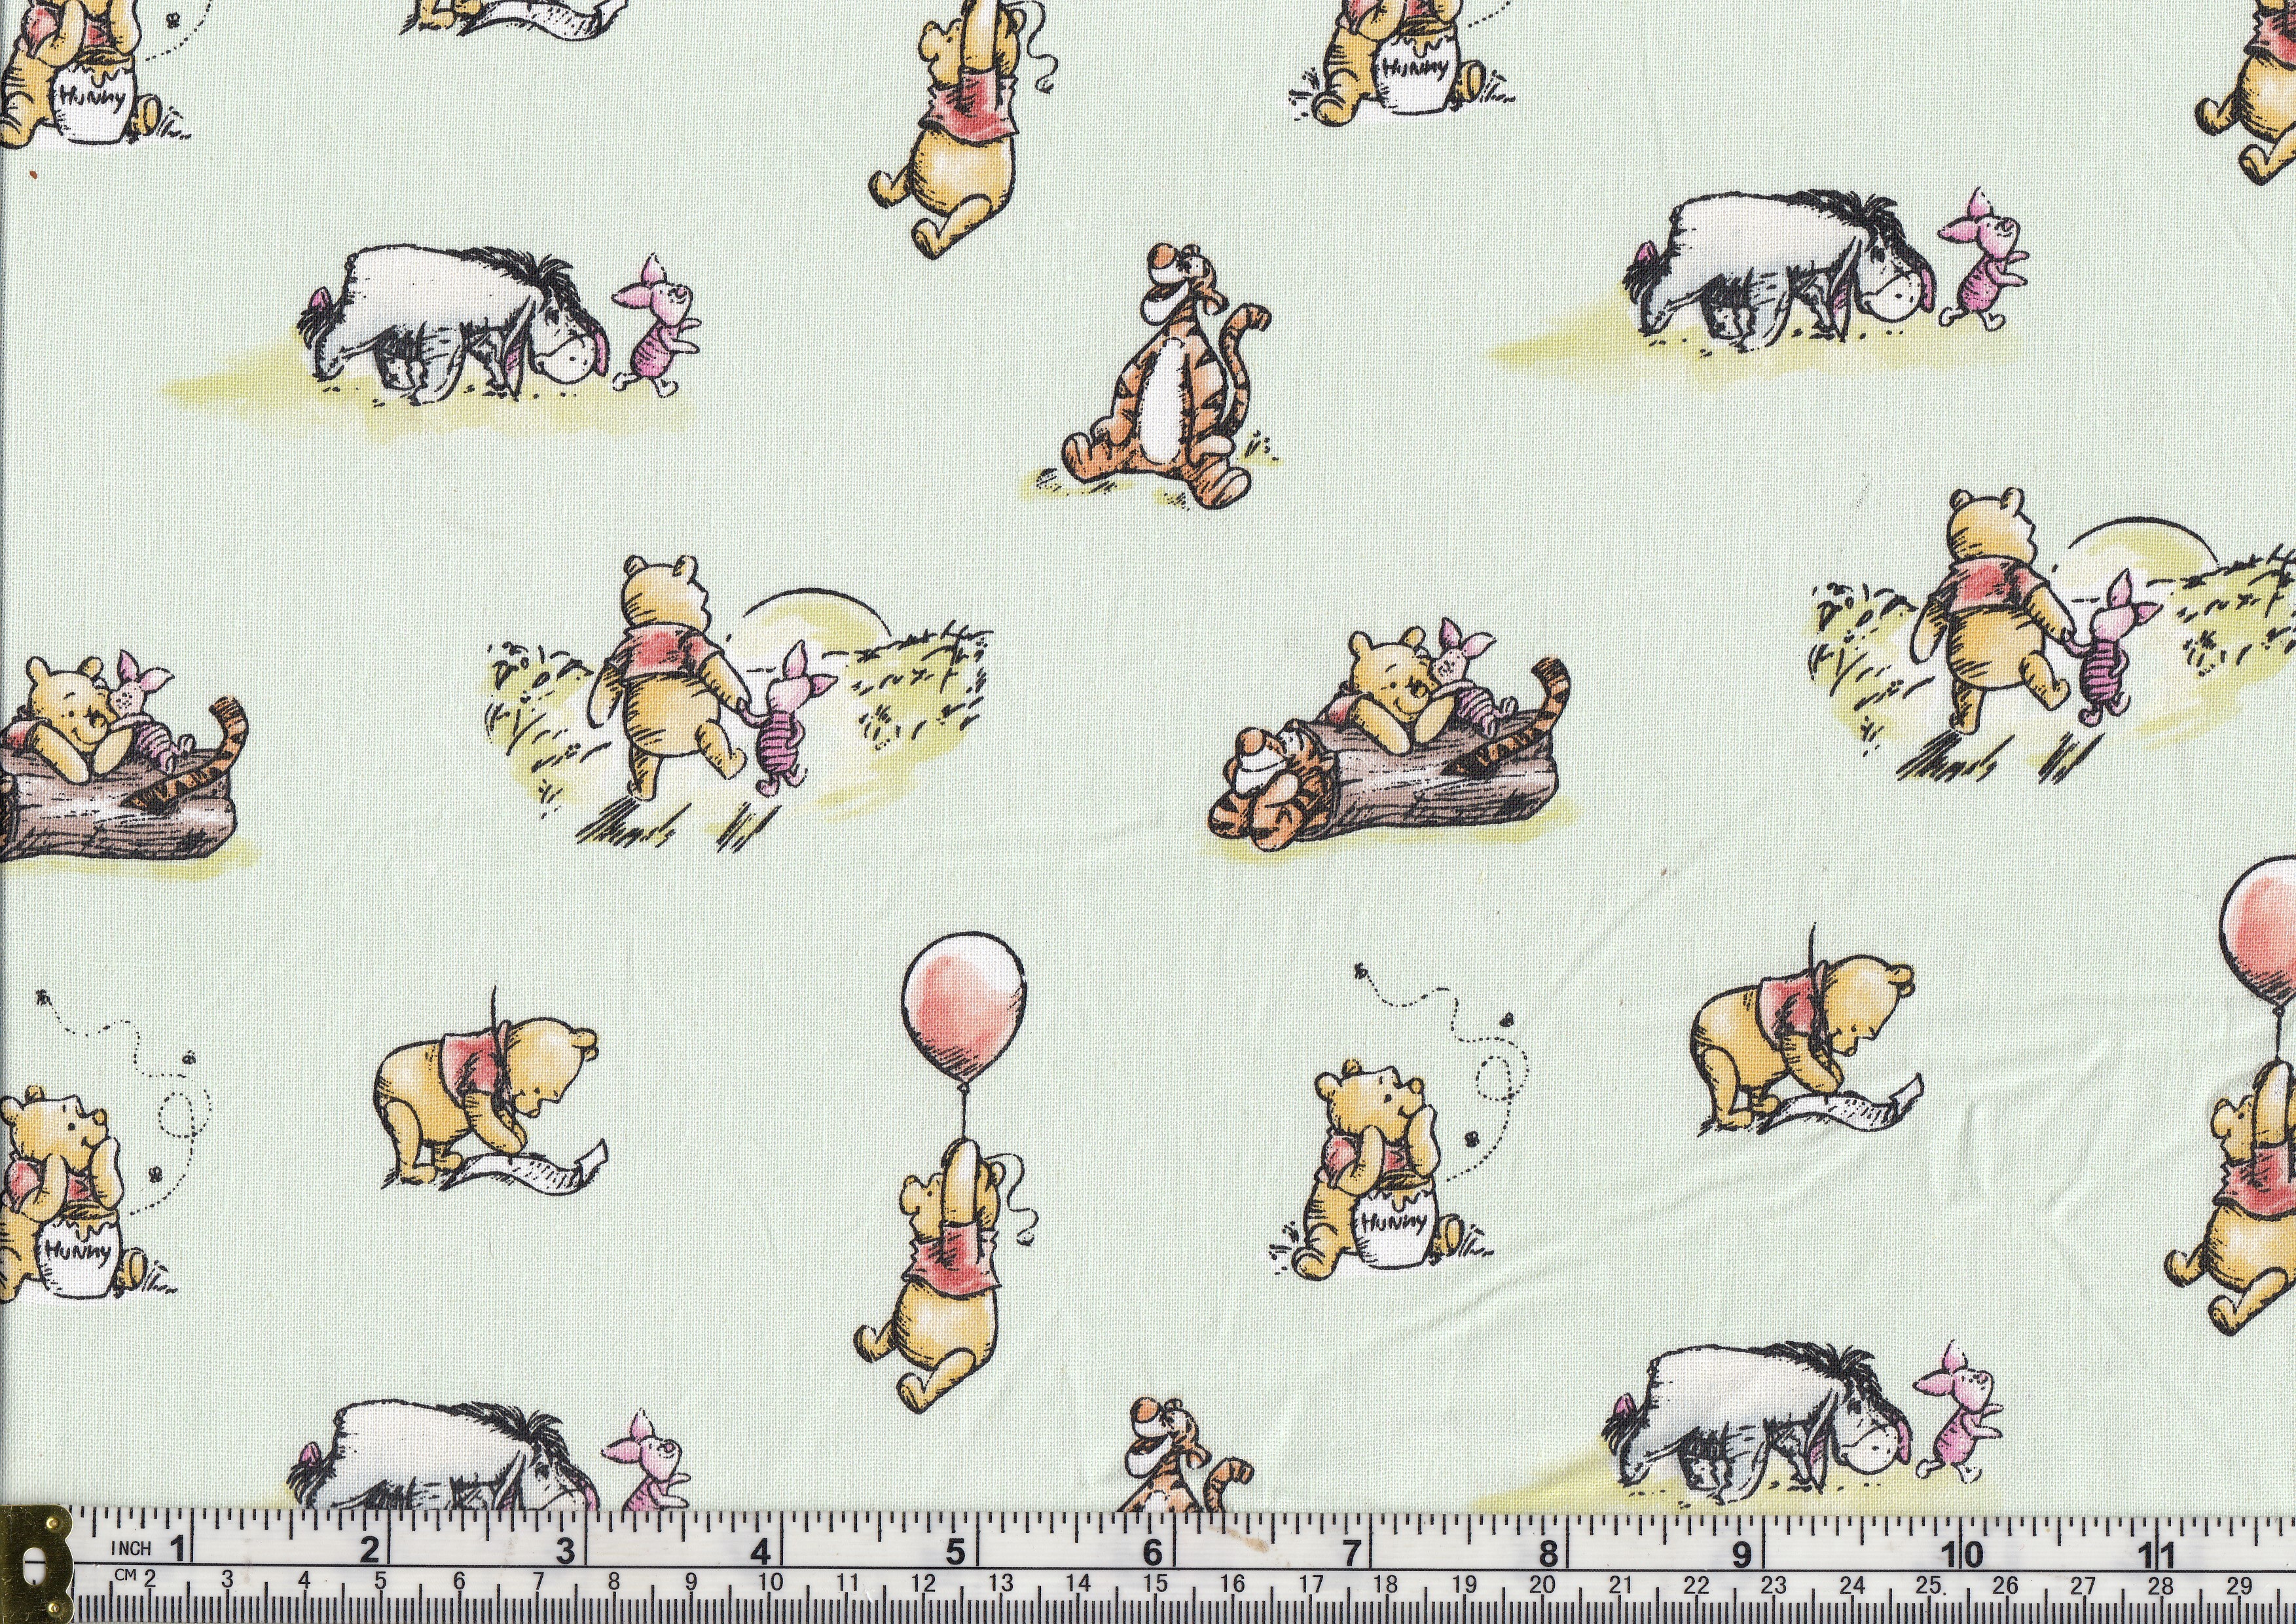 Disney All About Me! Cream Pooh & Friends Faces Fabric - Camelot